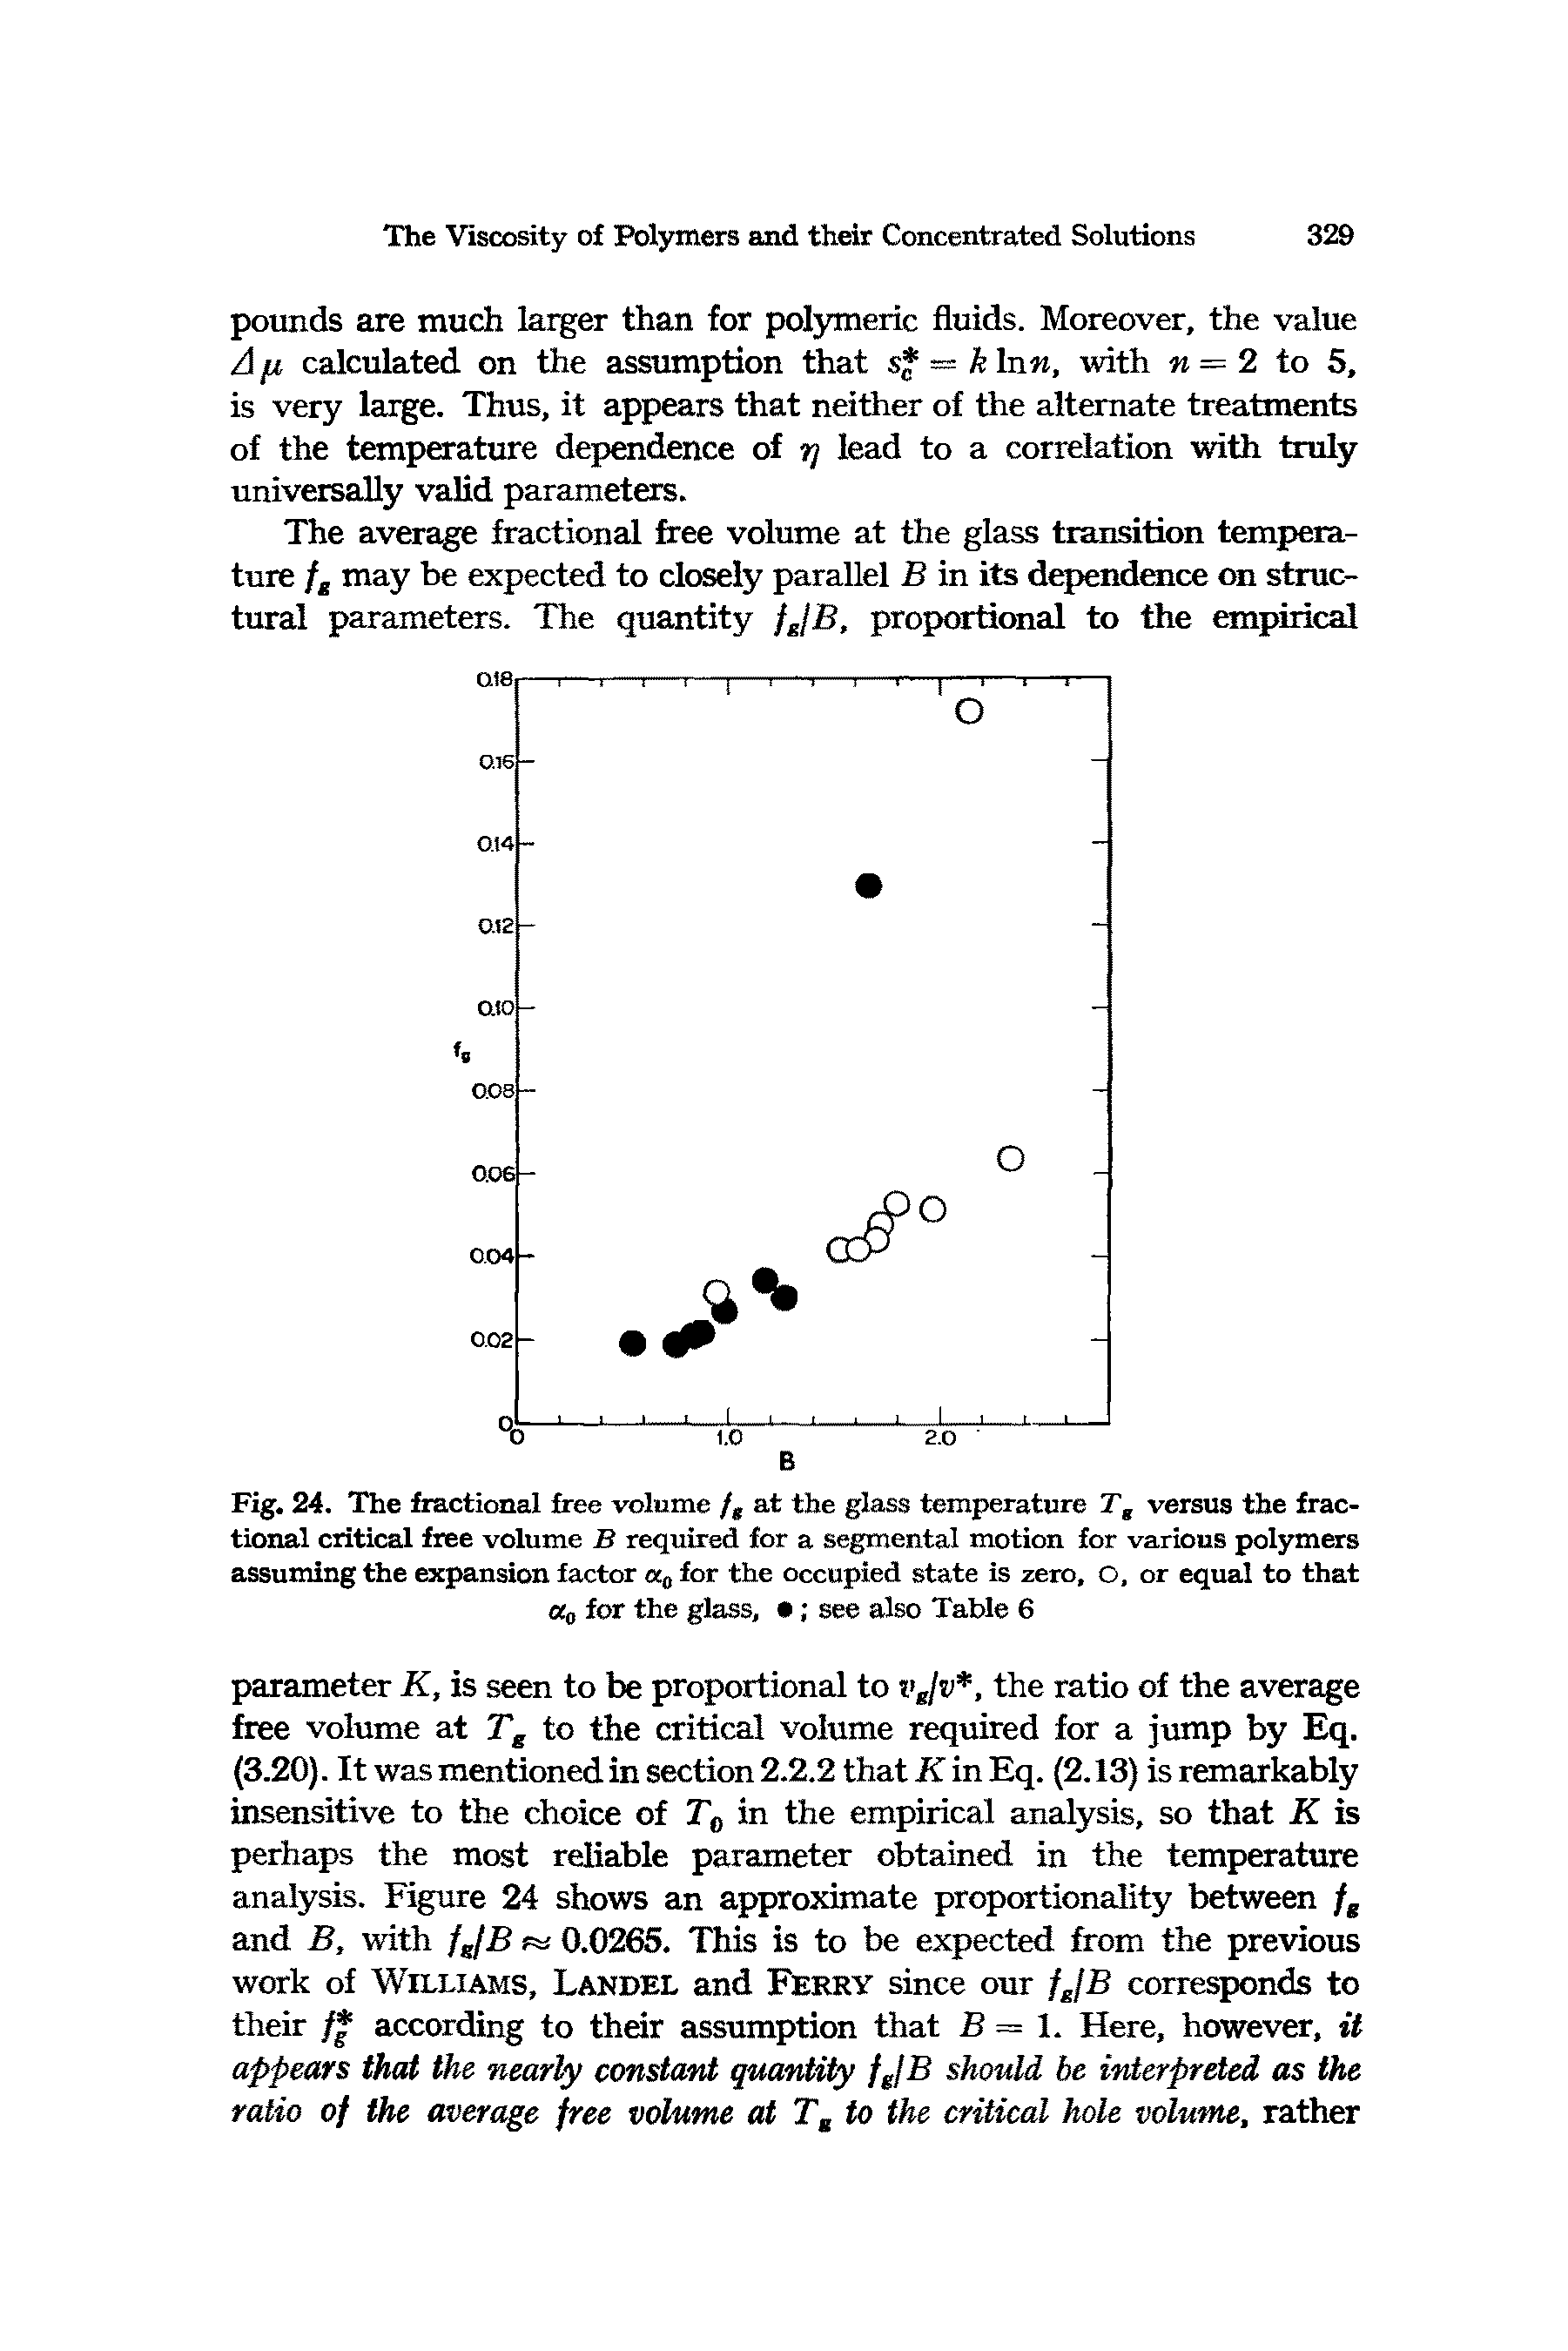 Fig. 24. The fractional free volume / at the glass temperature T, versus the fractional critical free volume B required for a segmental motion for various polymers assuming the expansion factor a for the occupied state is zero, O, or equal to that for the glass, see also Table 6...